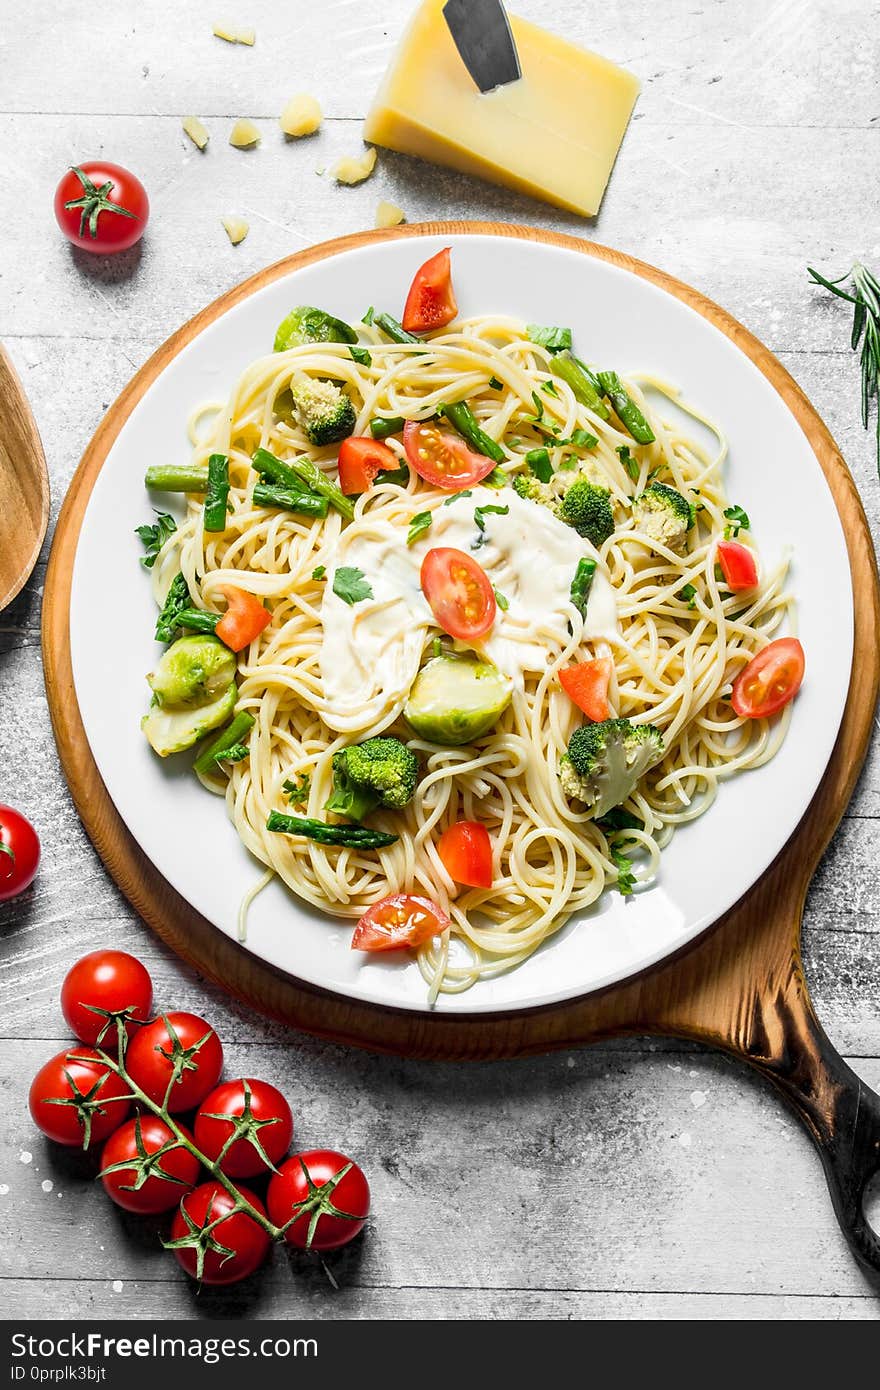 Pasta with vegetables and tomatoes on a branch. On white wooden background